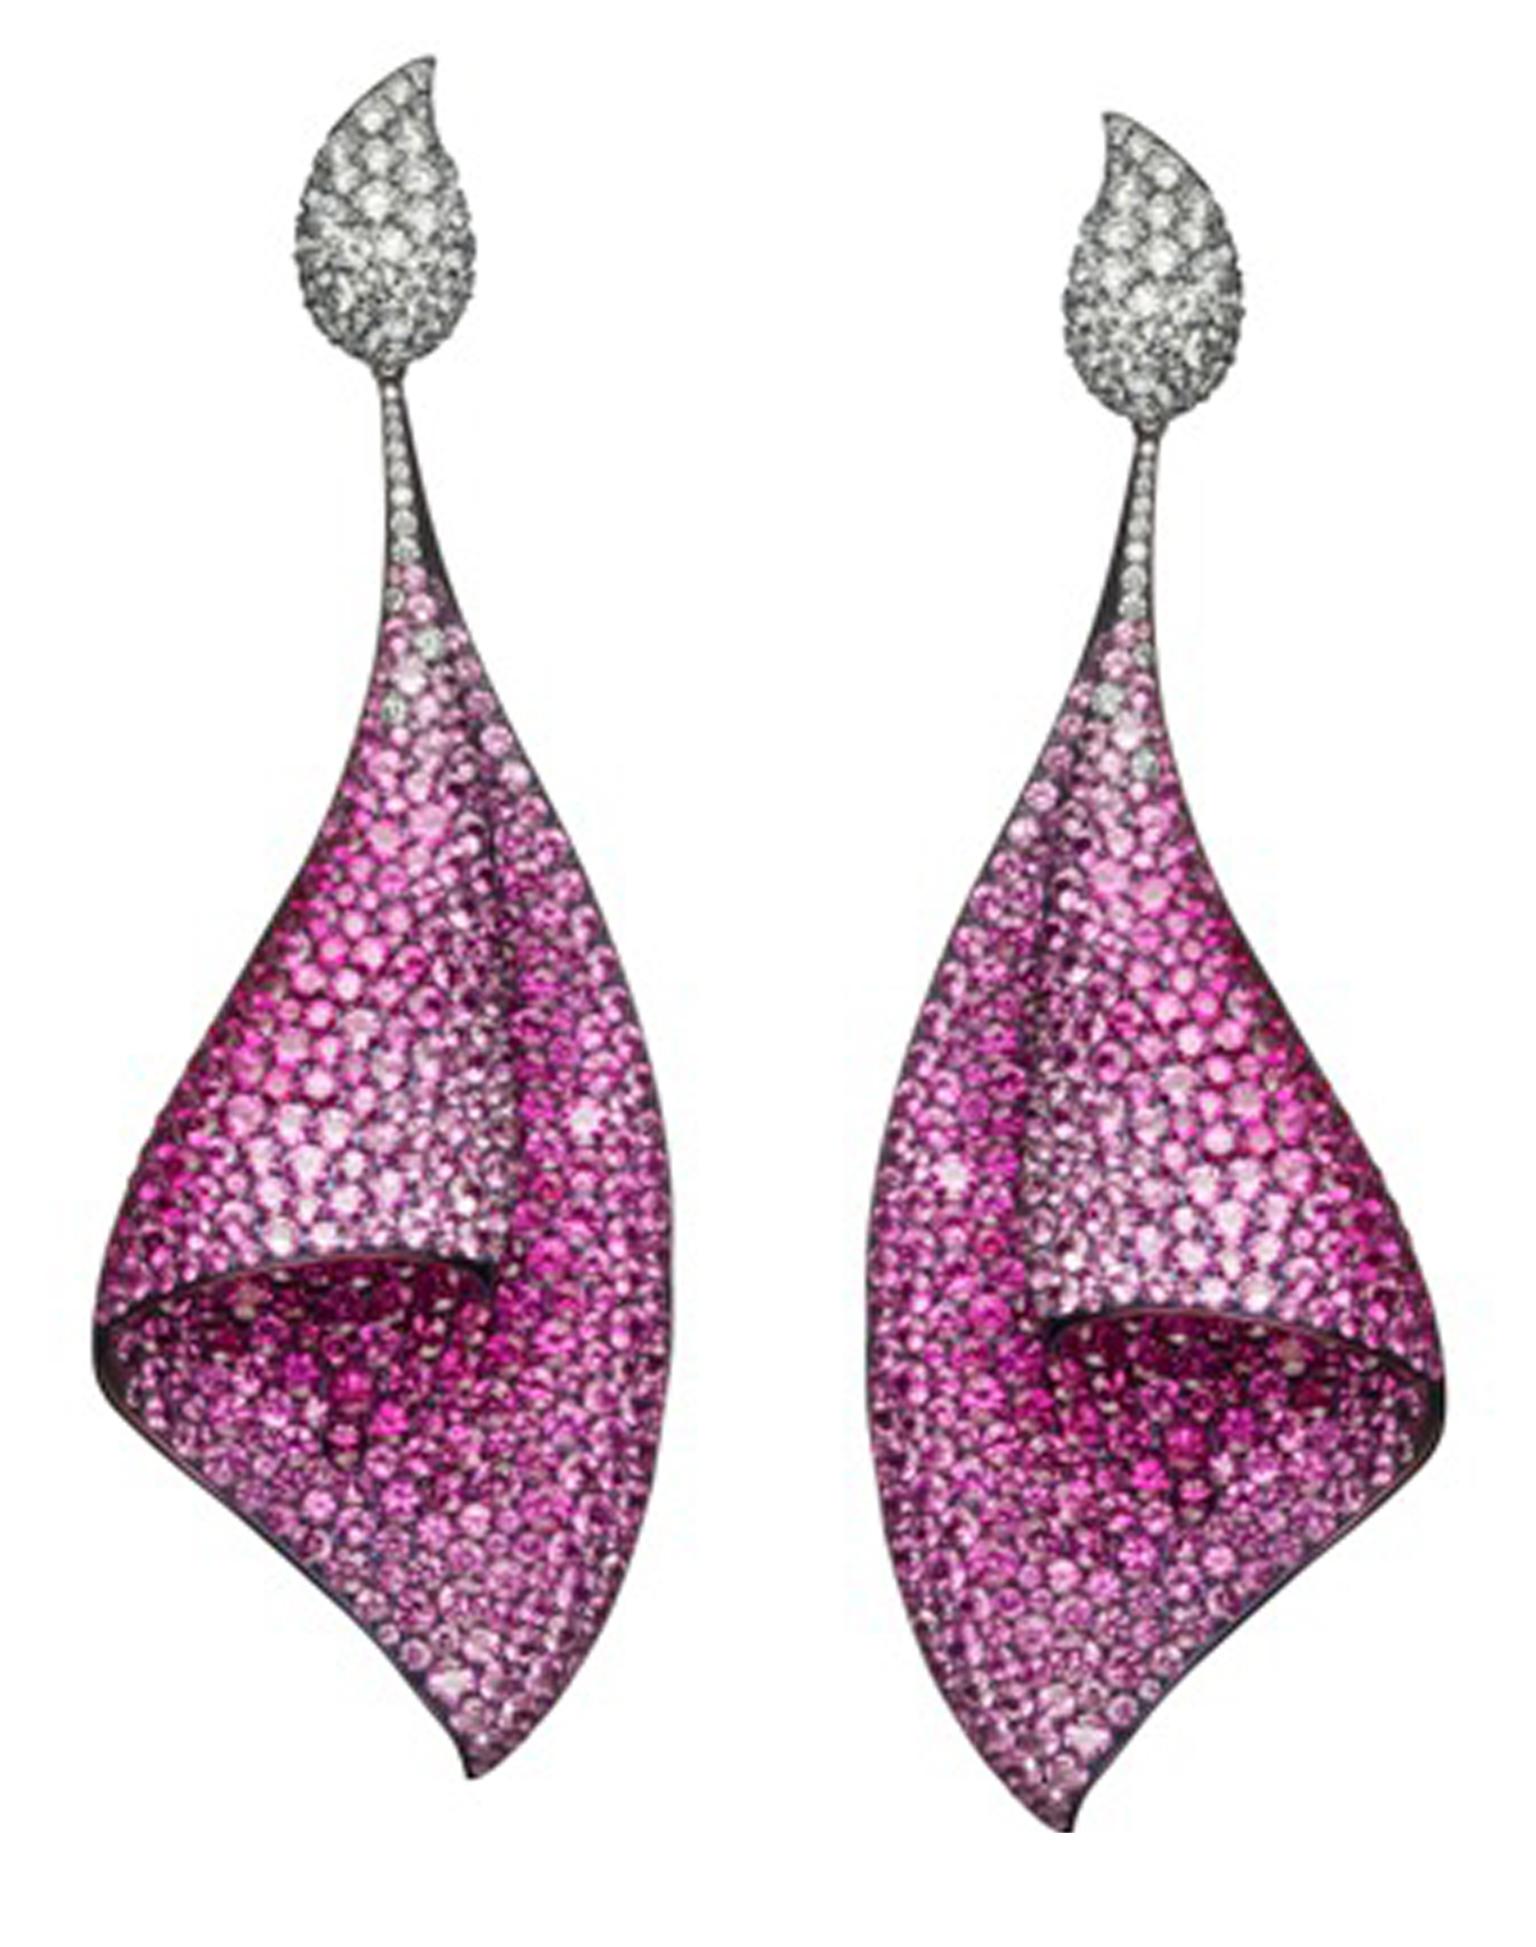 Adler Titanium And Pink Sapphire ‘Sail ’ Earrings ZOOM